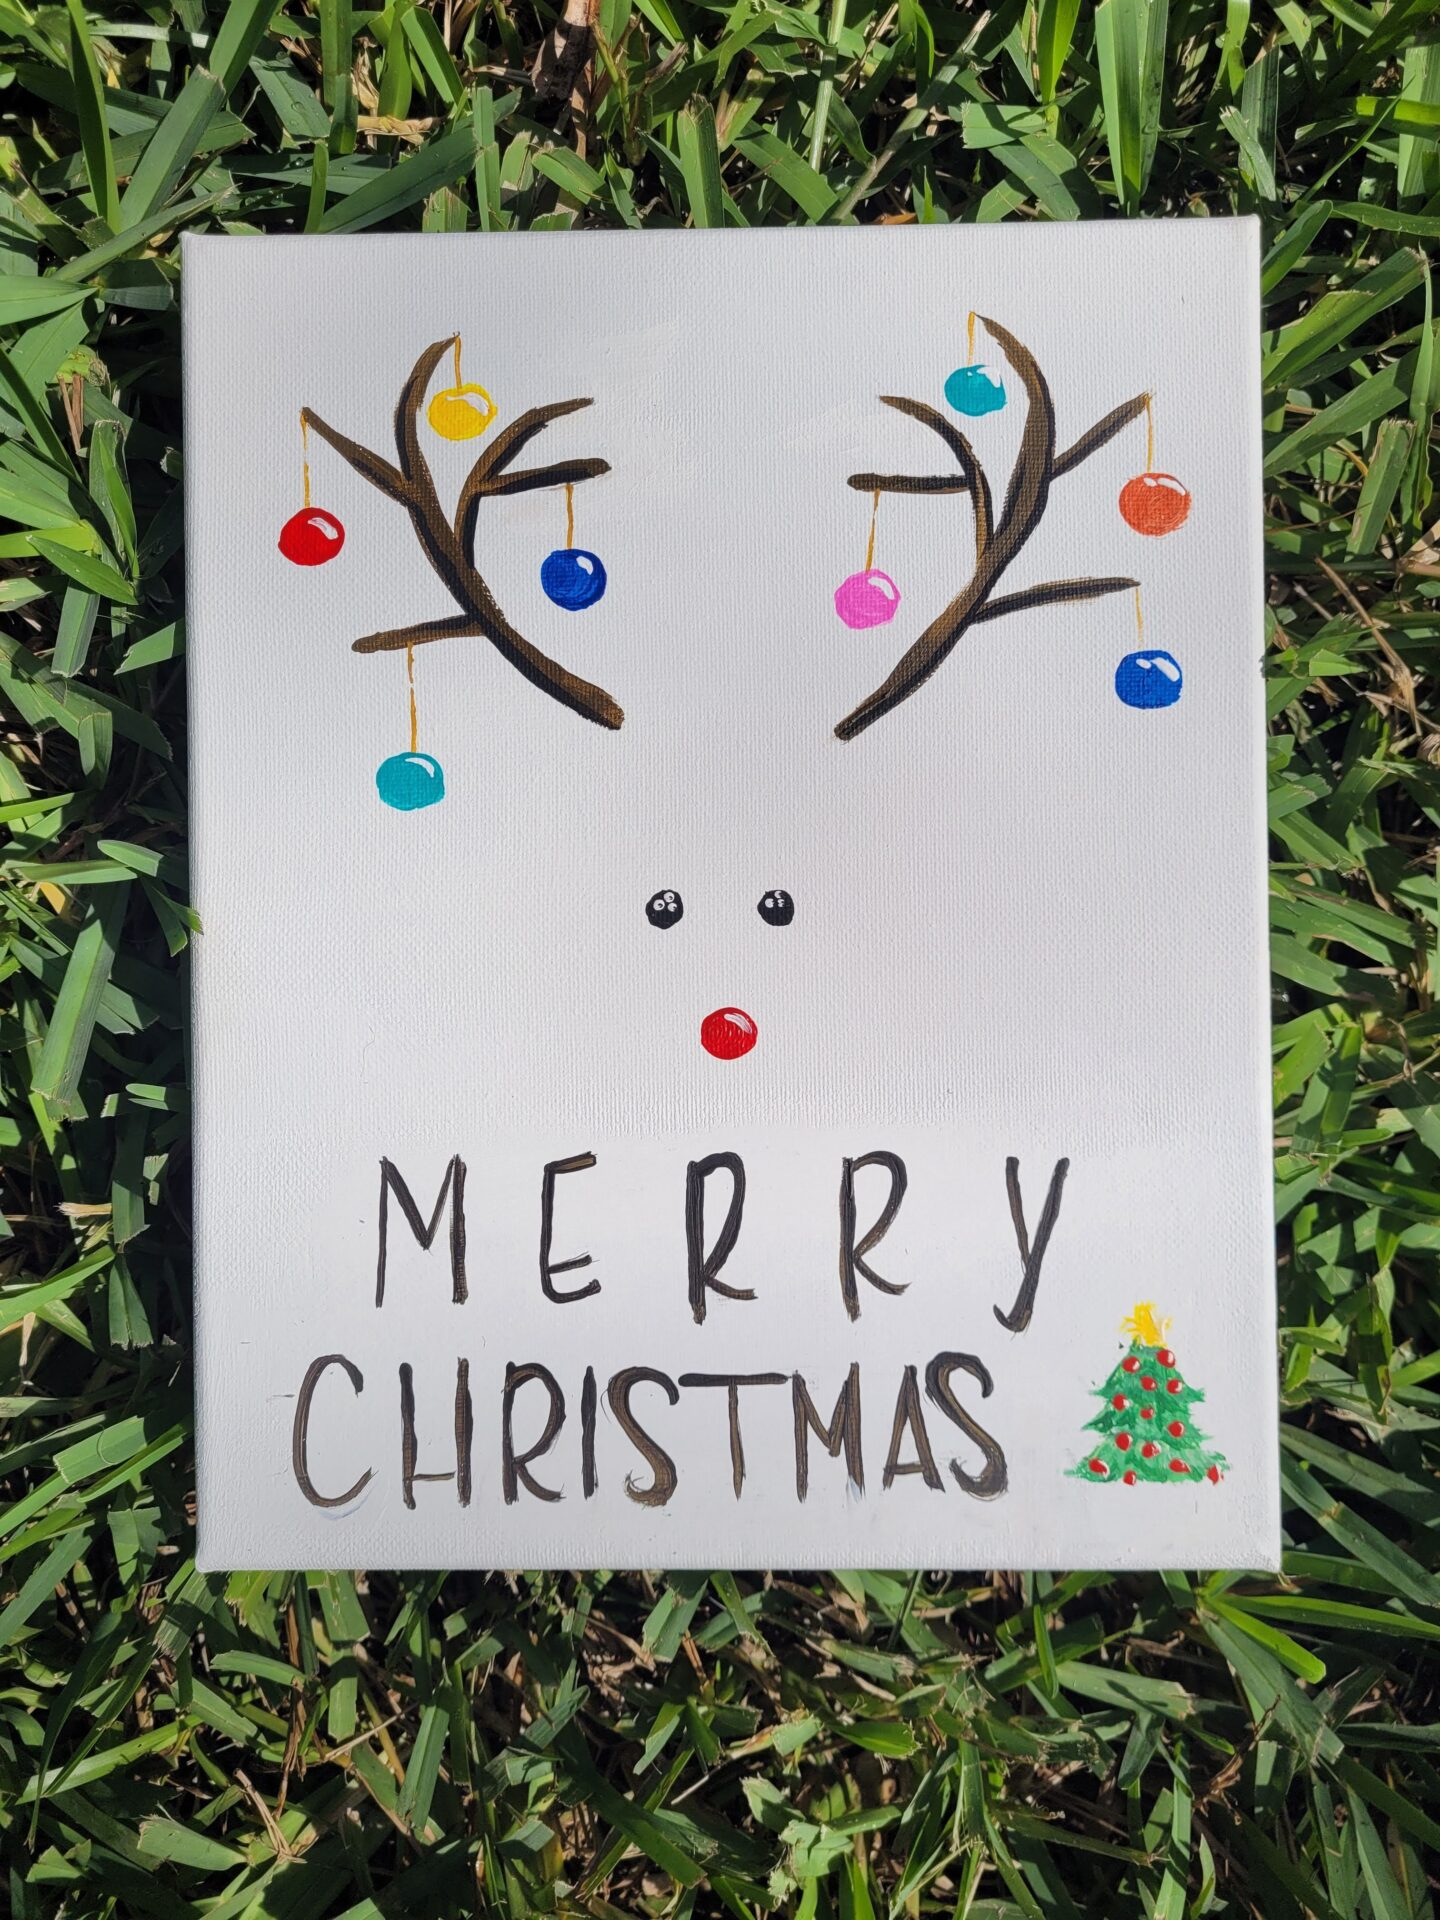 A Christmas Themed Painting Canvas on Grass